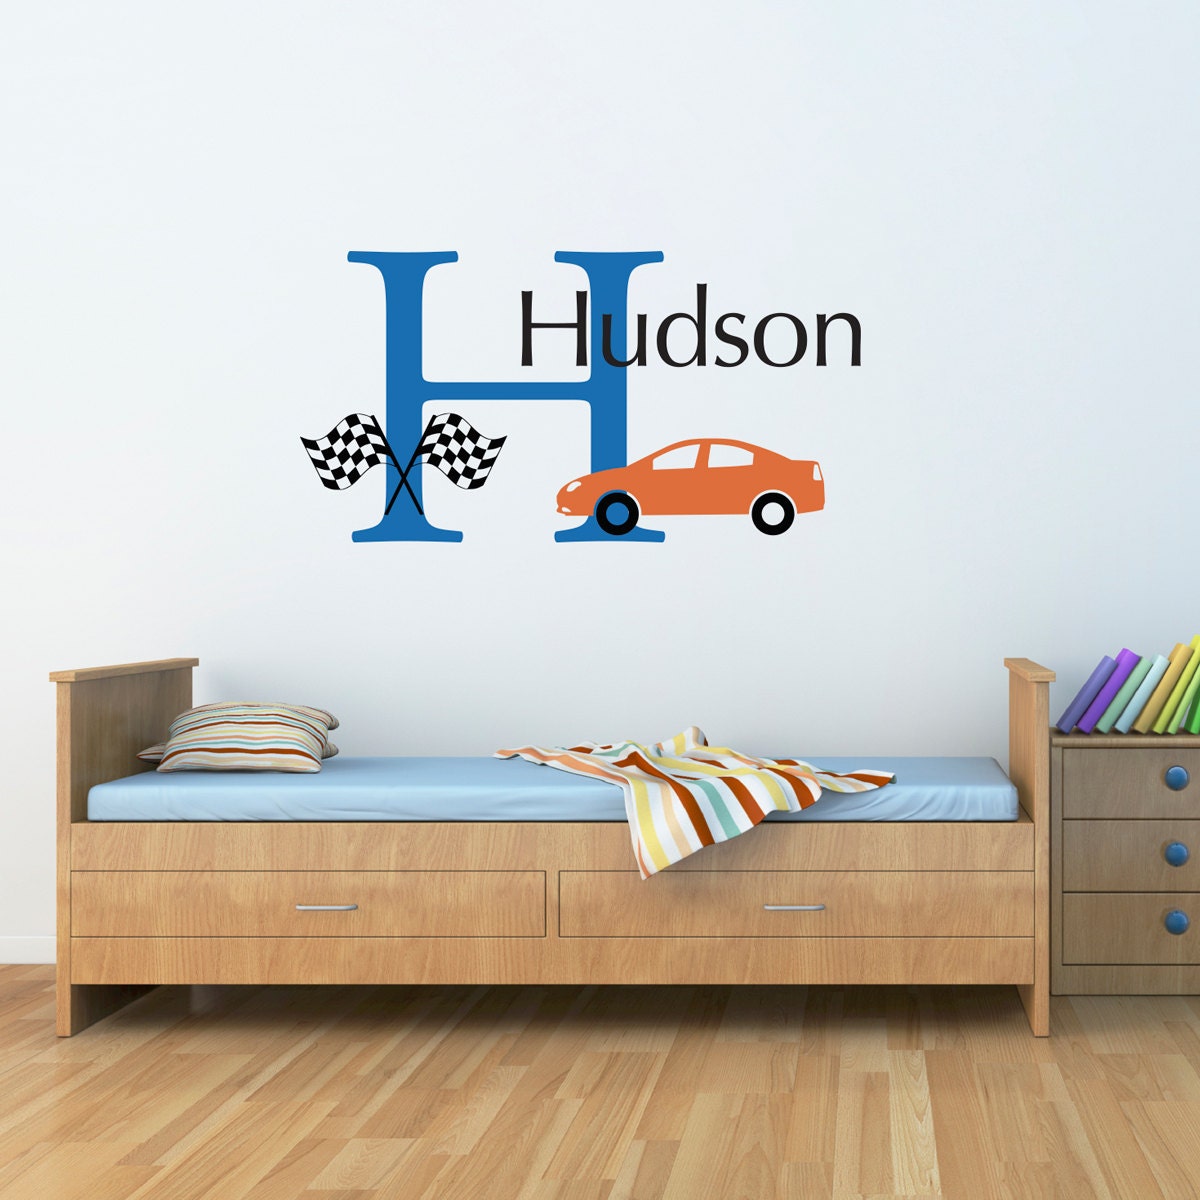 Boy Race Car Wall Decal Set - Personalized Name and Initial Decal - Racing Wall Decal - Large